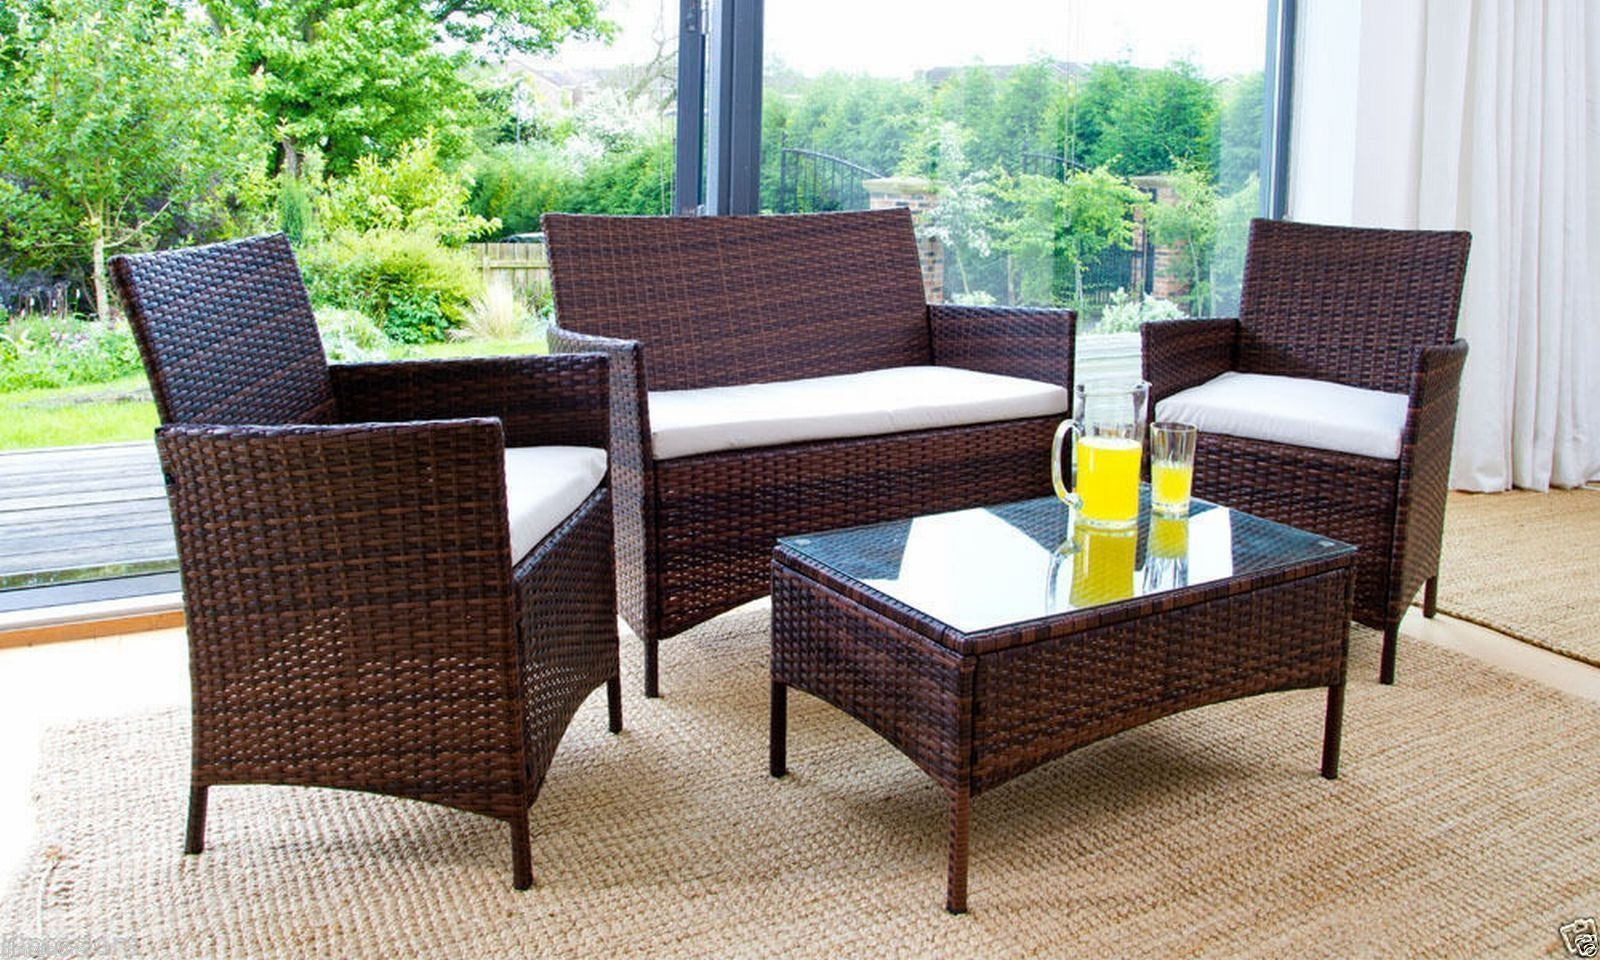 Rattan Garden Furniture Set Brown 4 Piece Chairs Sofa Table Outdoor Patio Conservatory